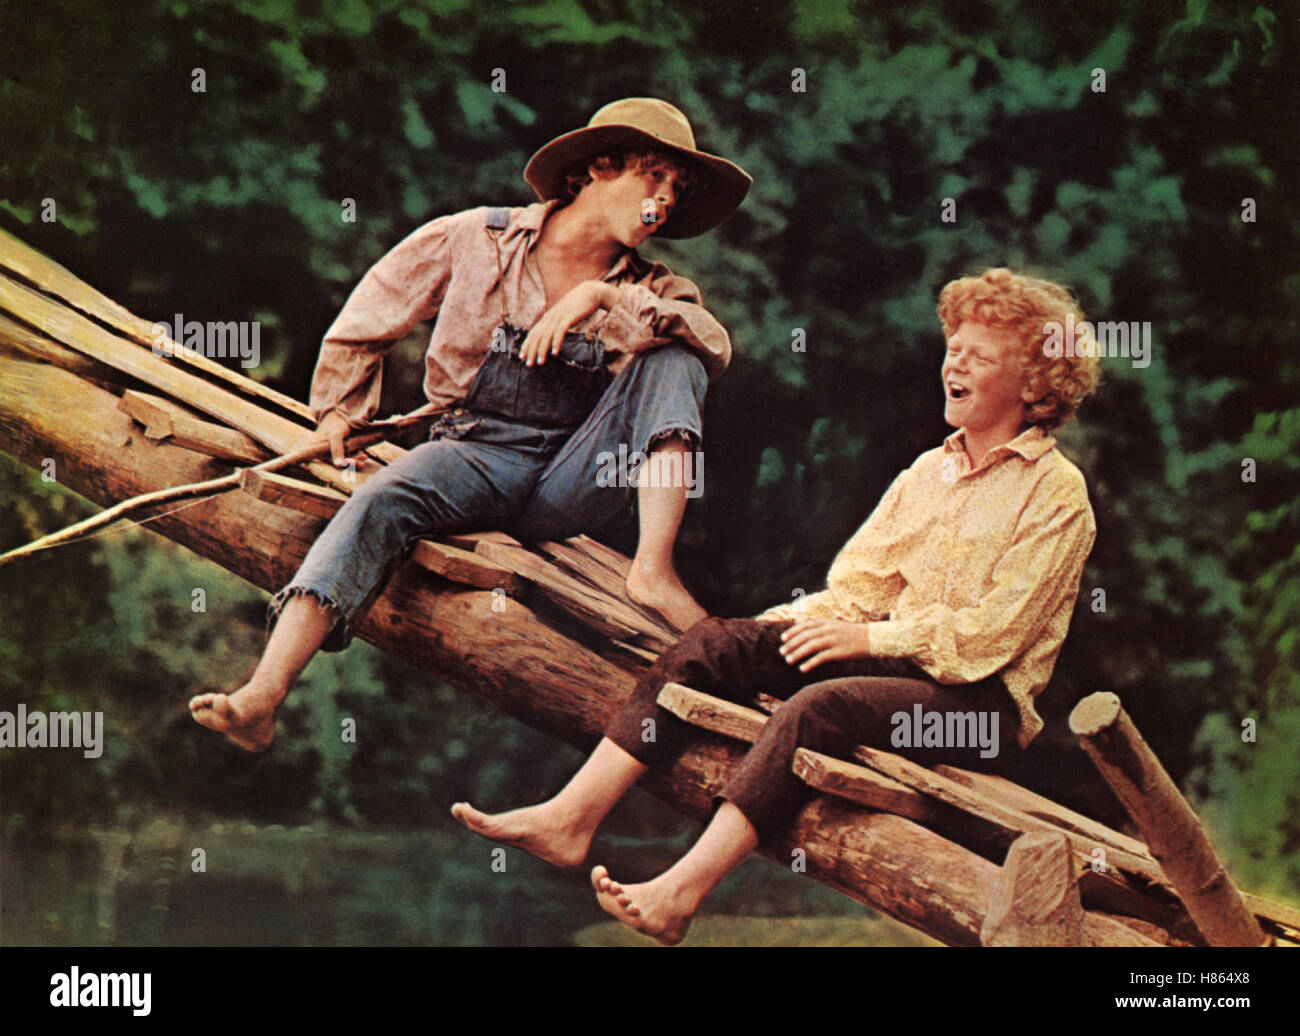 Page 8 - Tom Sawyer High Resolution Stock Photography and Images - Alamy